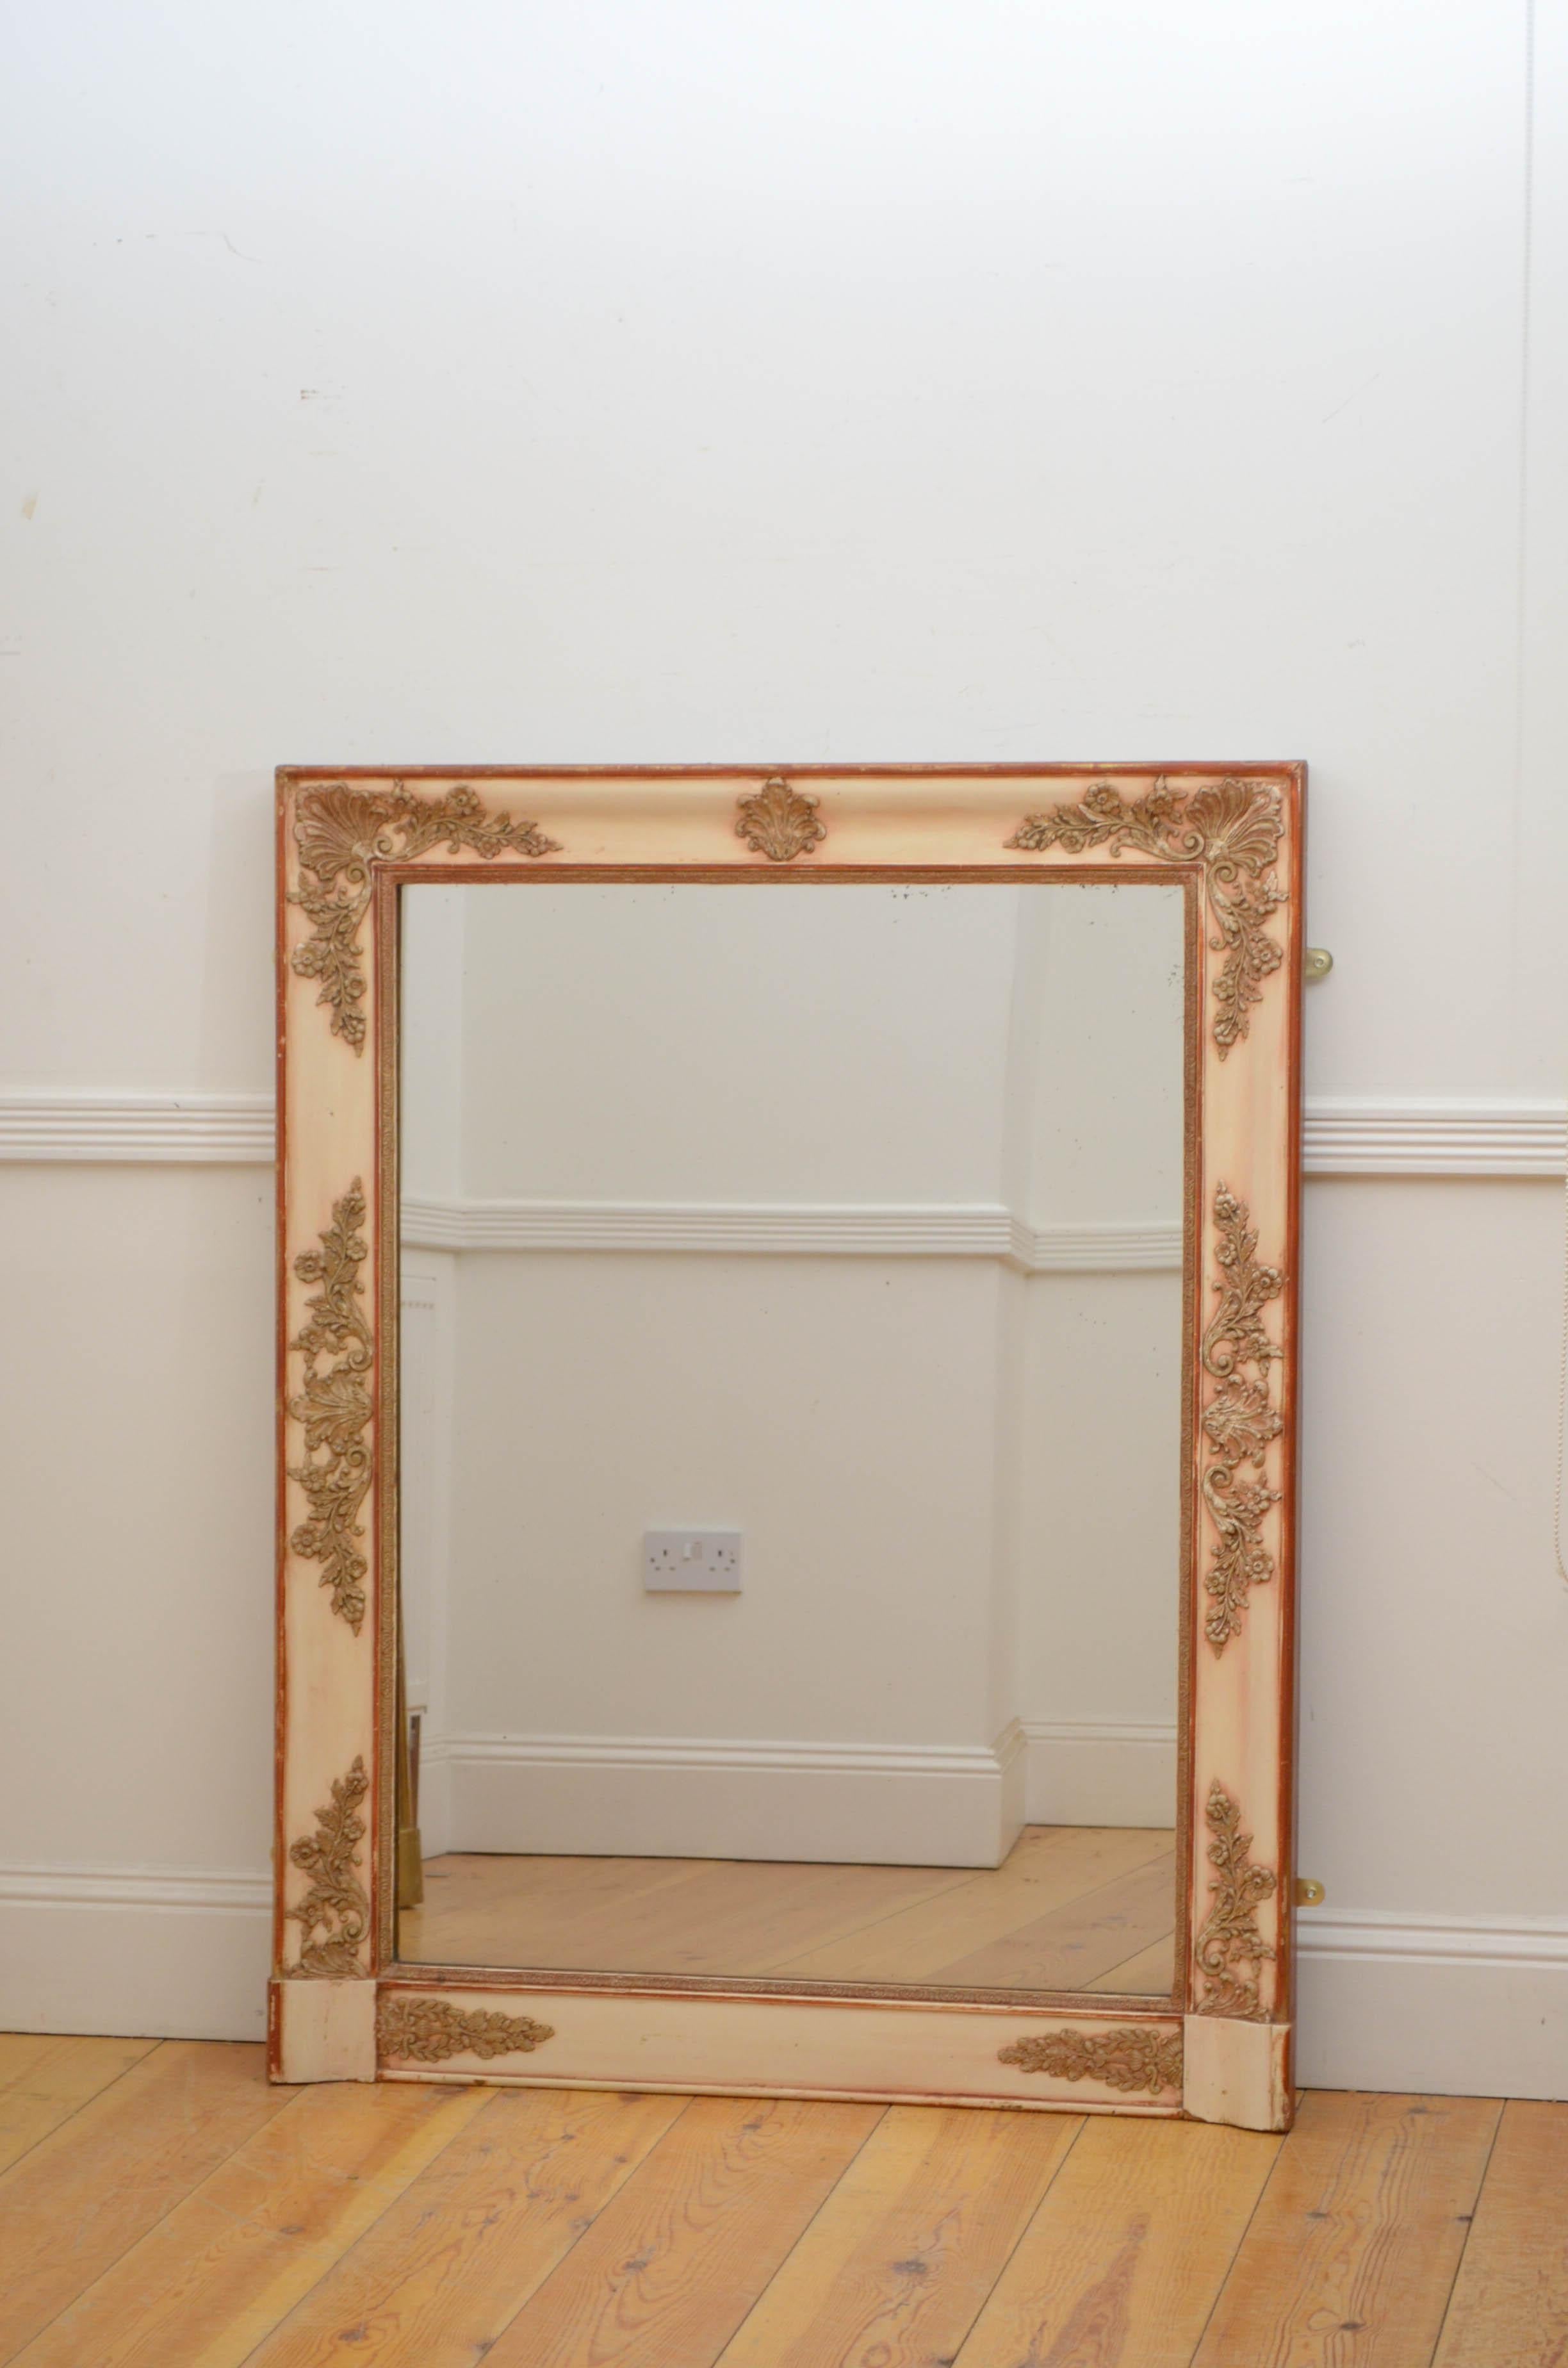 Sn5204 19th century French wall mirror, having original glass with some imperfections in moulded and floral decorated frame. This antique mirror is in home ready condition. c1850

Measures: H 49